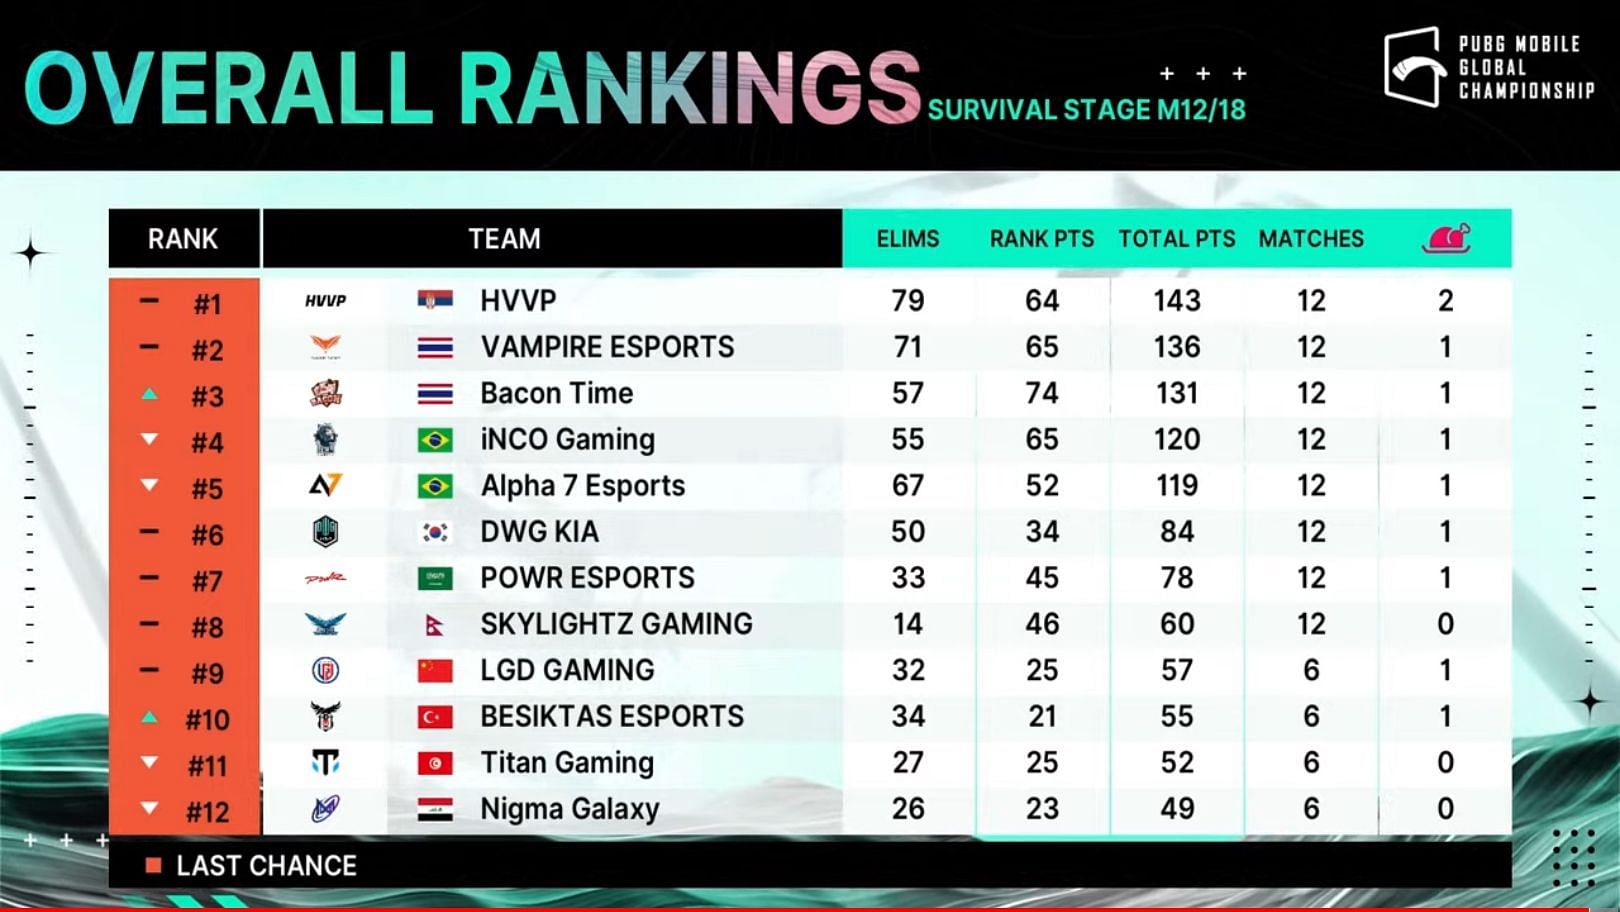 Top 12 teams&#039; rankings after PMGC Survival Stage Day 2 (Image via PUBG Mobile)